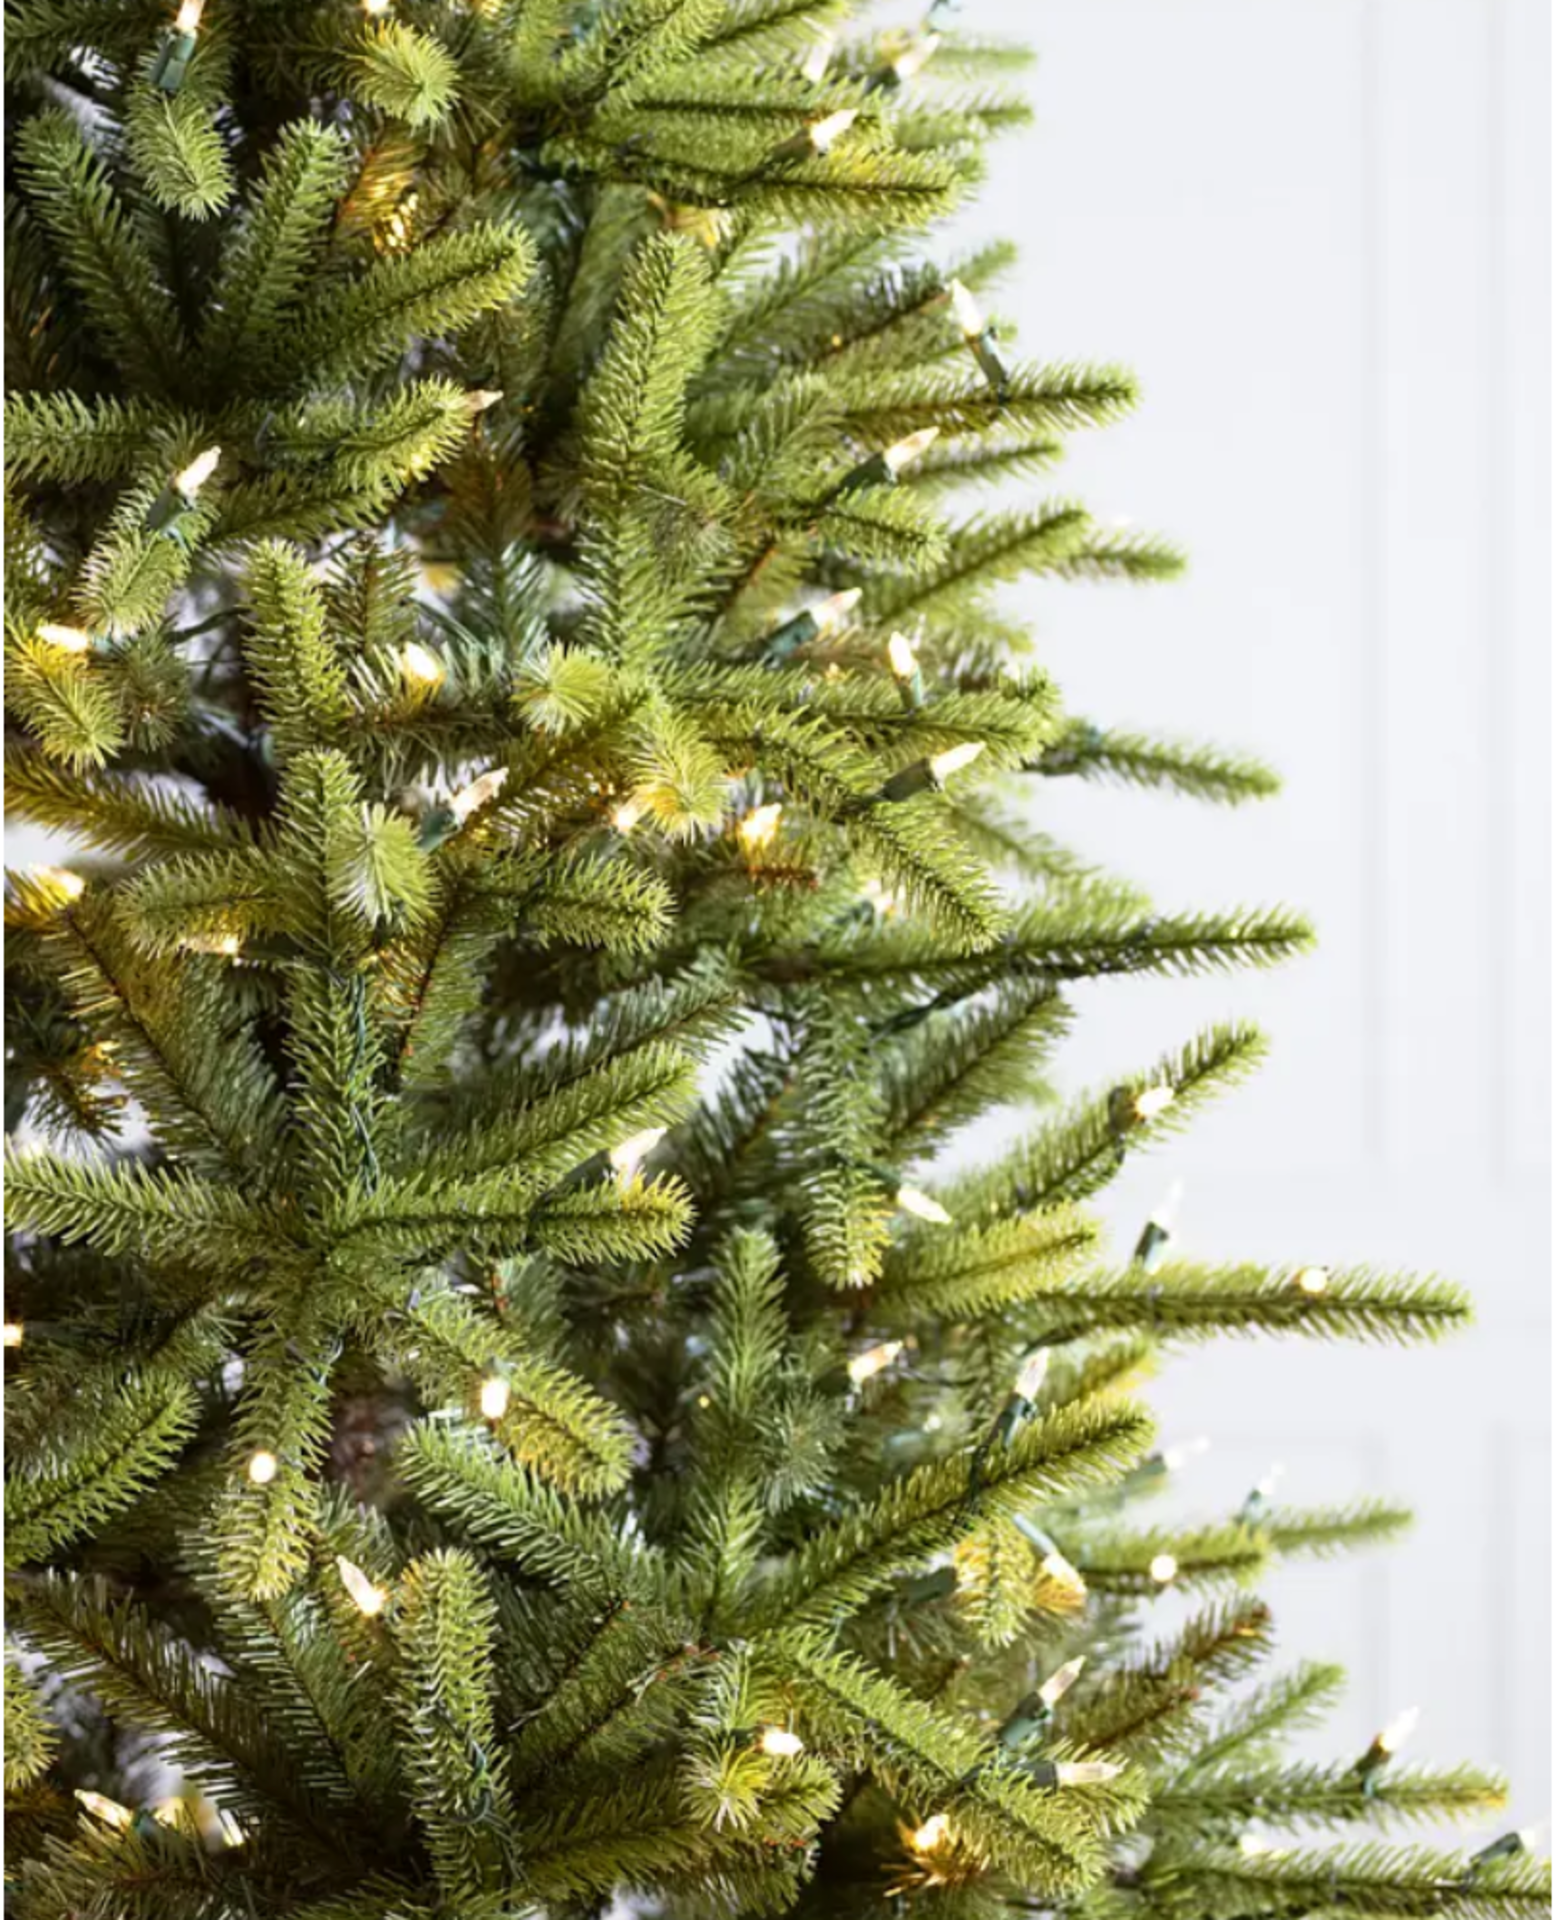 BH (The worlds leading Christmas Tree Brand) Grandview Fir 6ft Easy Plug with LED Clear Lights. - Image 2 of 3